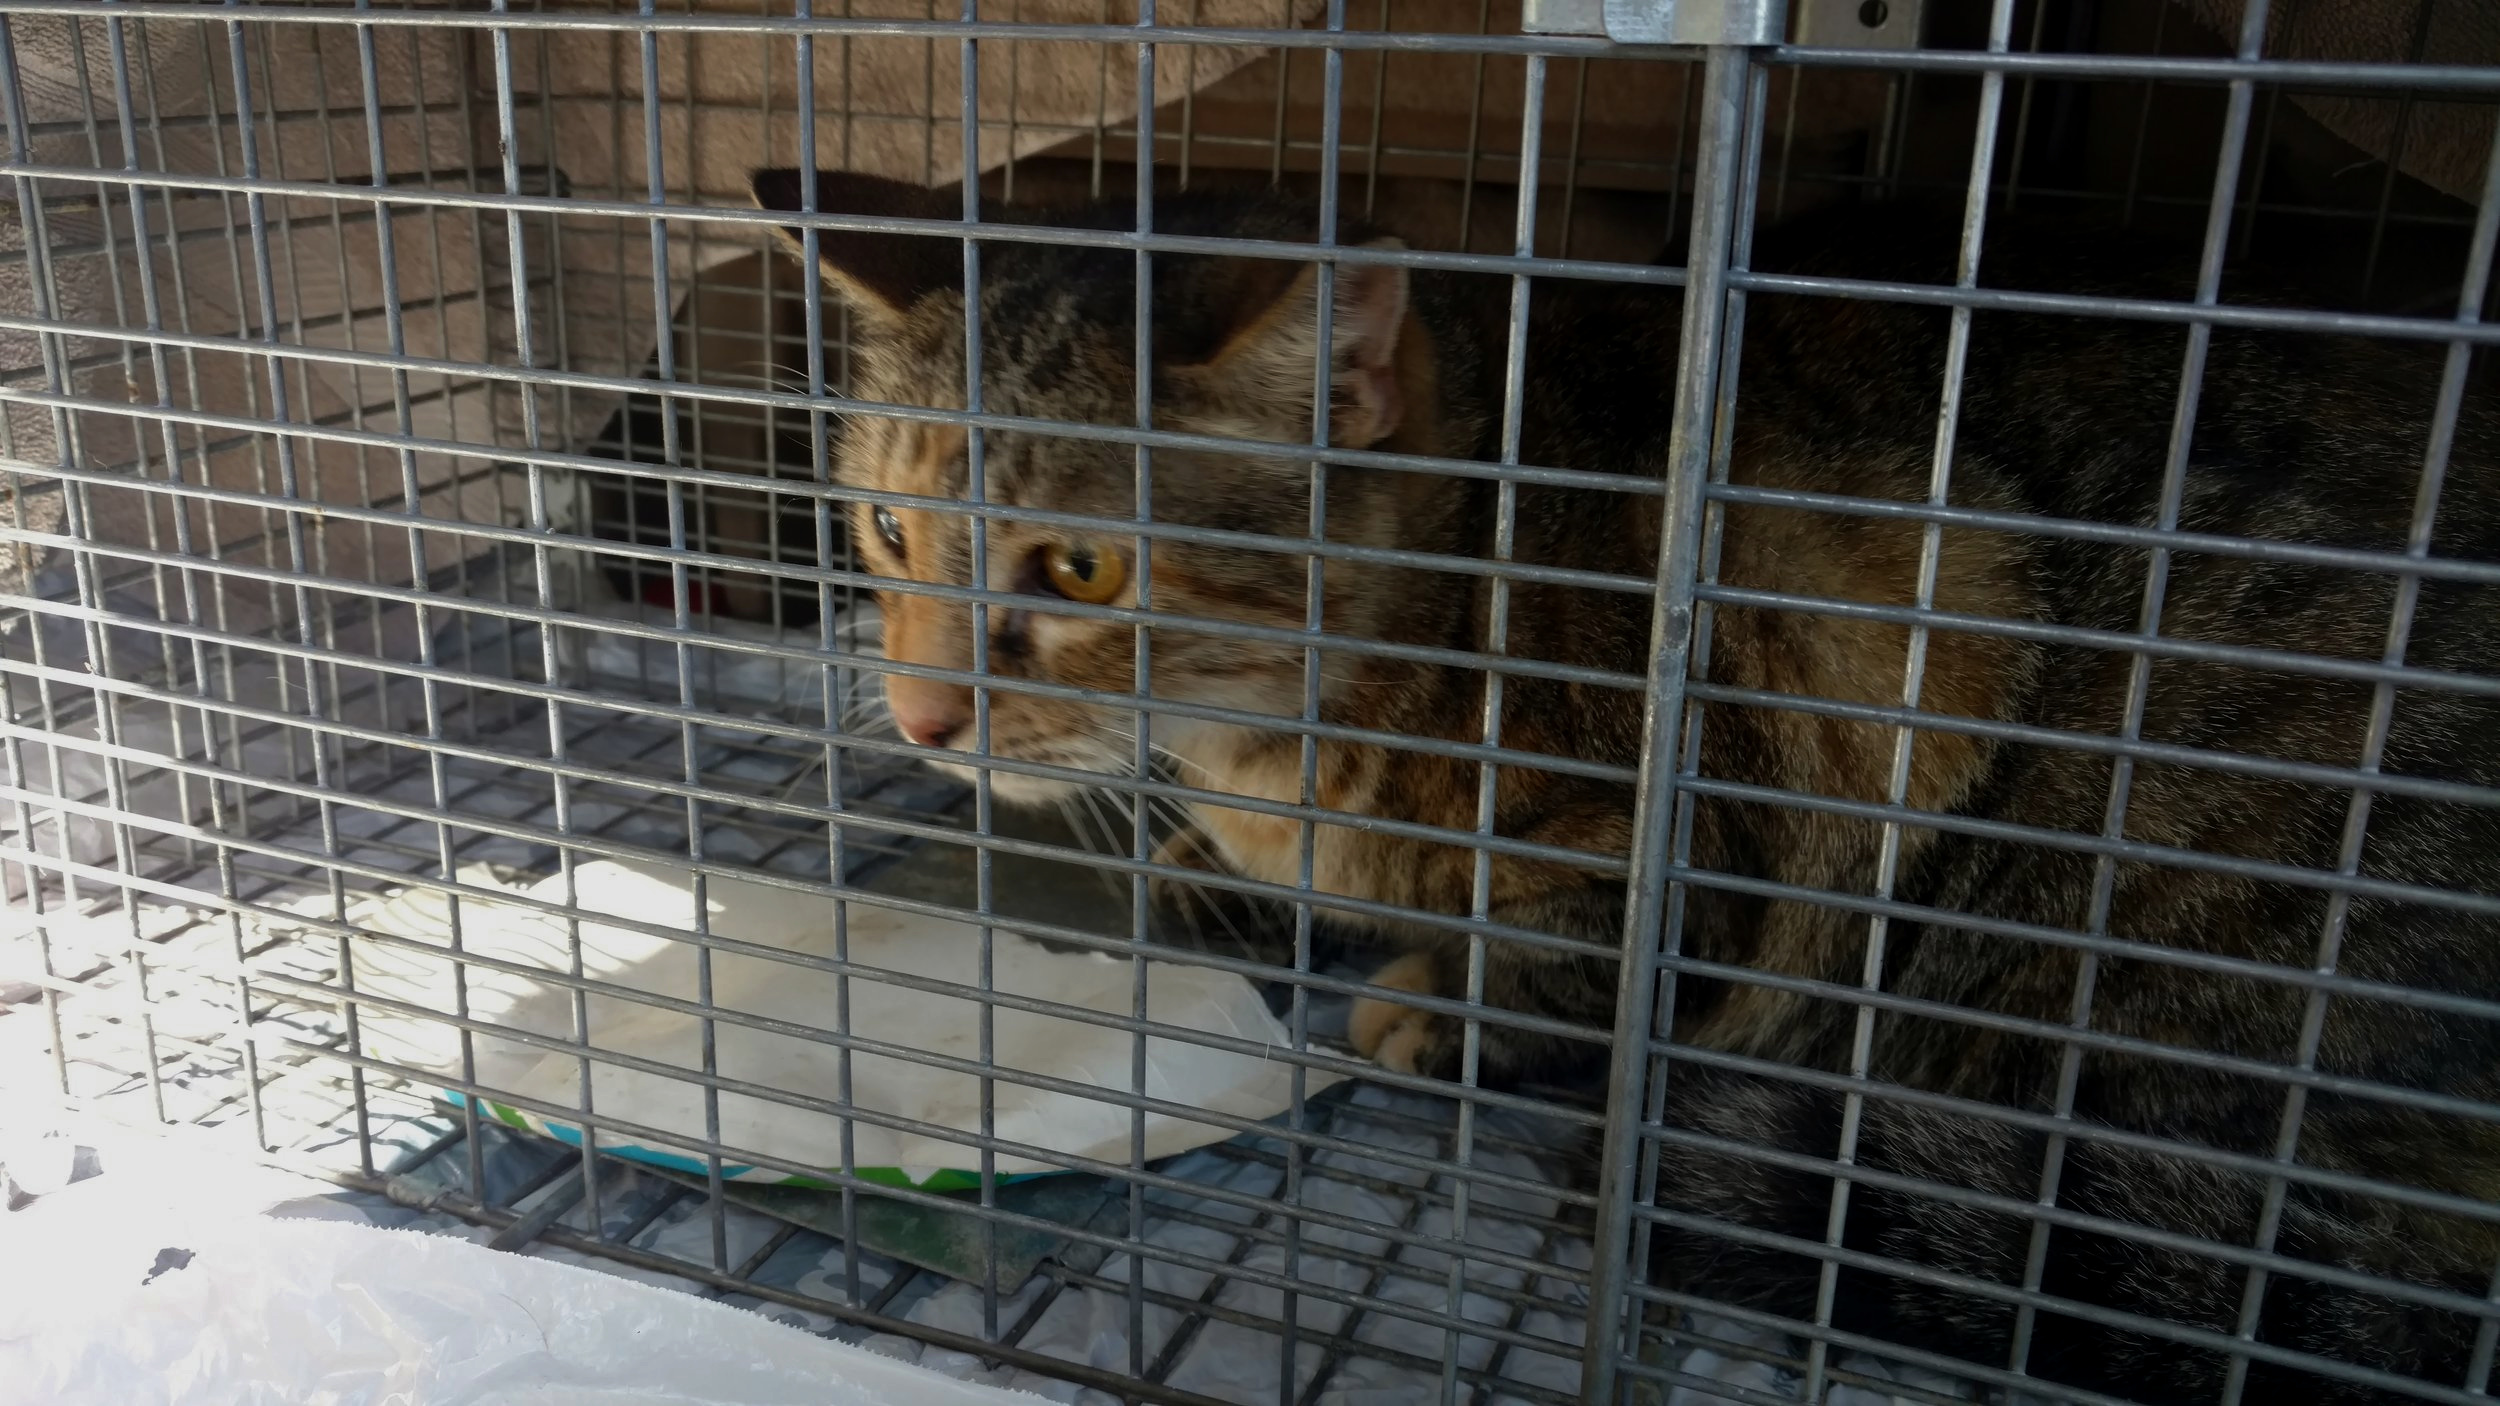 Trapping – Texas Cat Org